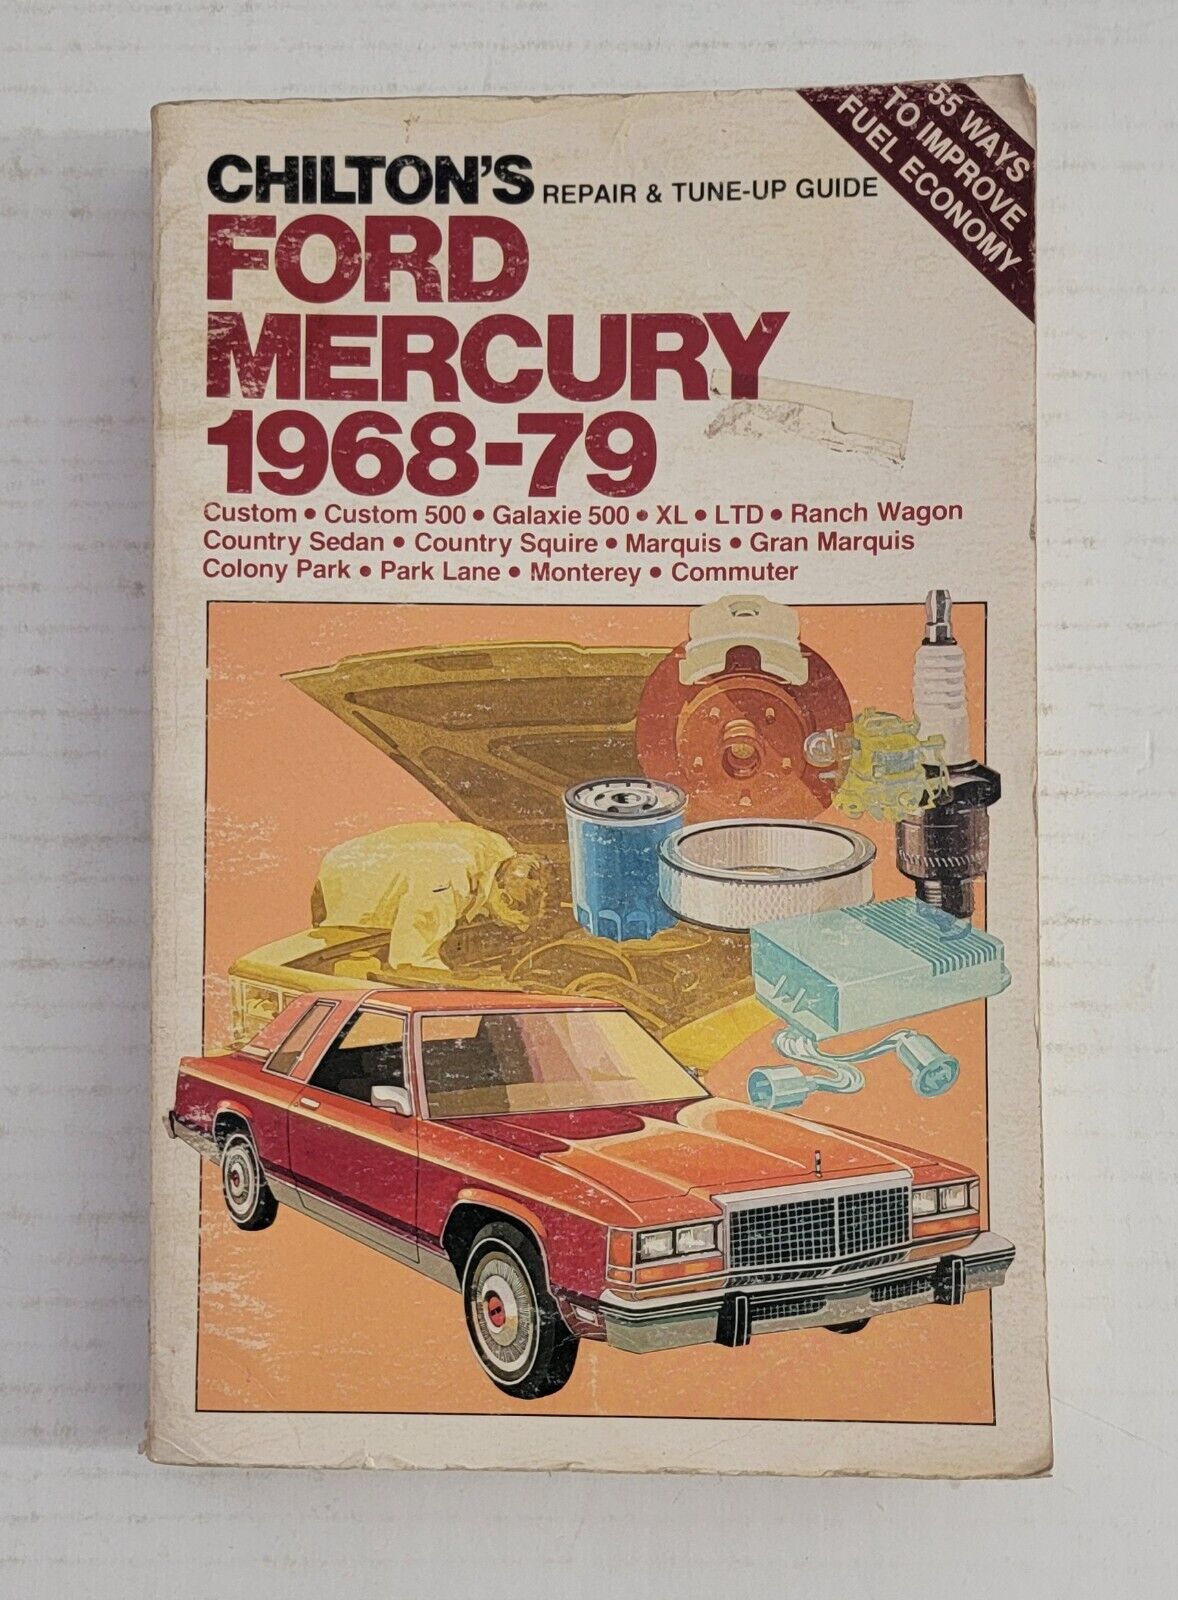 Vintage Chilton's Ford Mercury 1968-79 Repair & Tune-Up Guide 